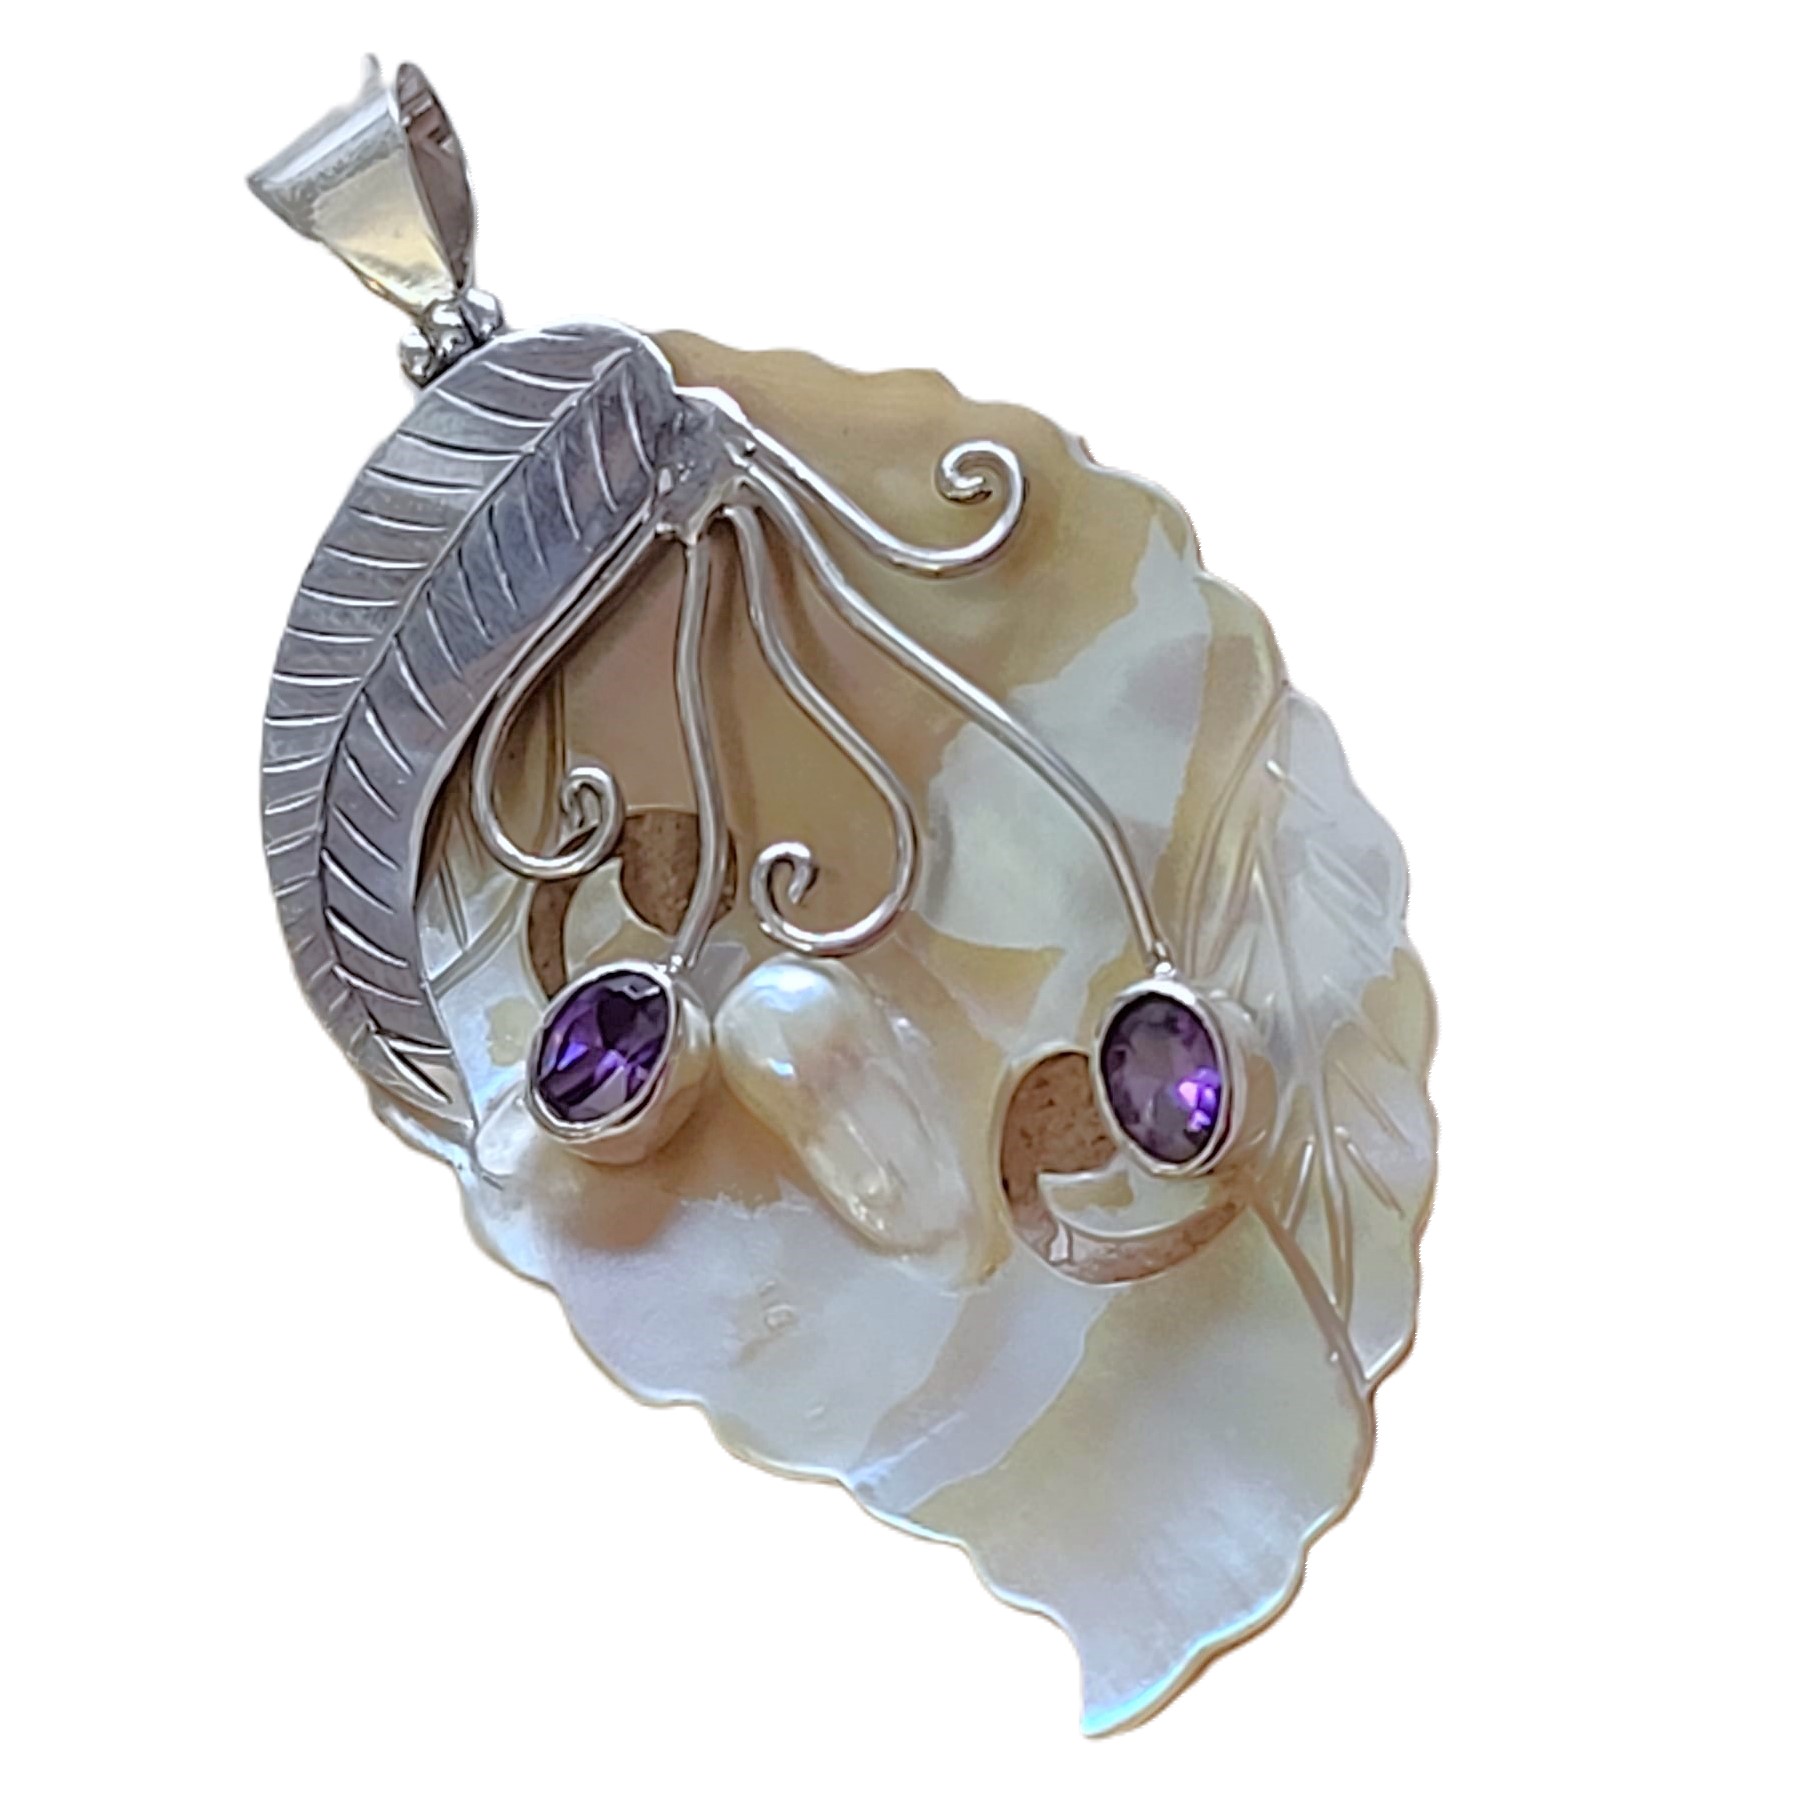 Mop Shell with Amethyst Gemstones 925 Sterling Silver Pendant - Click Image to Close